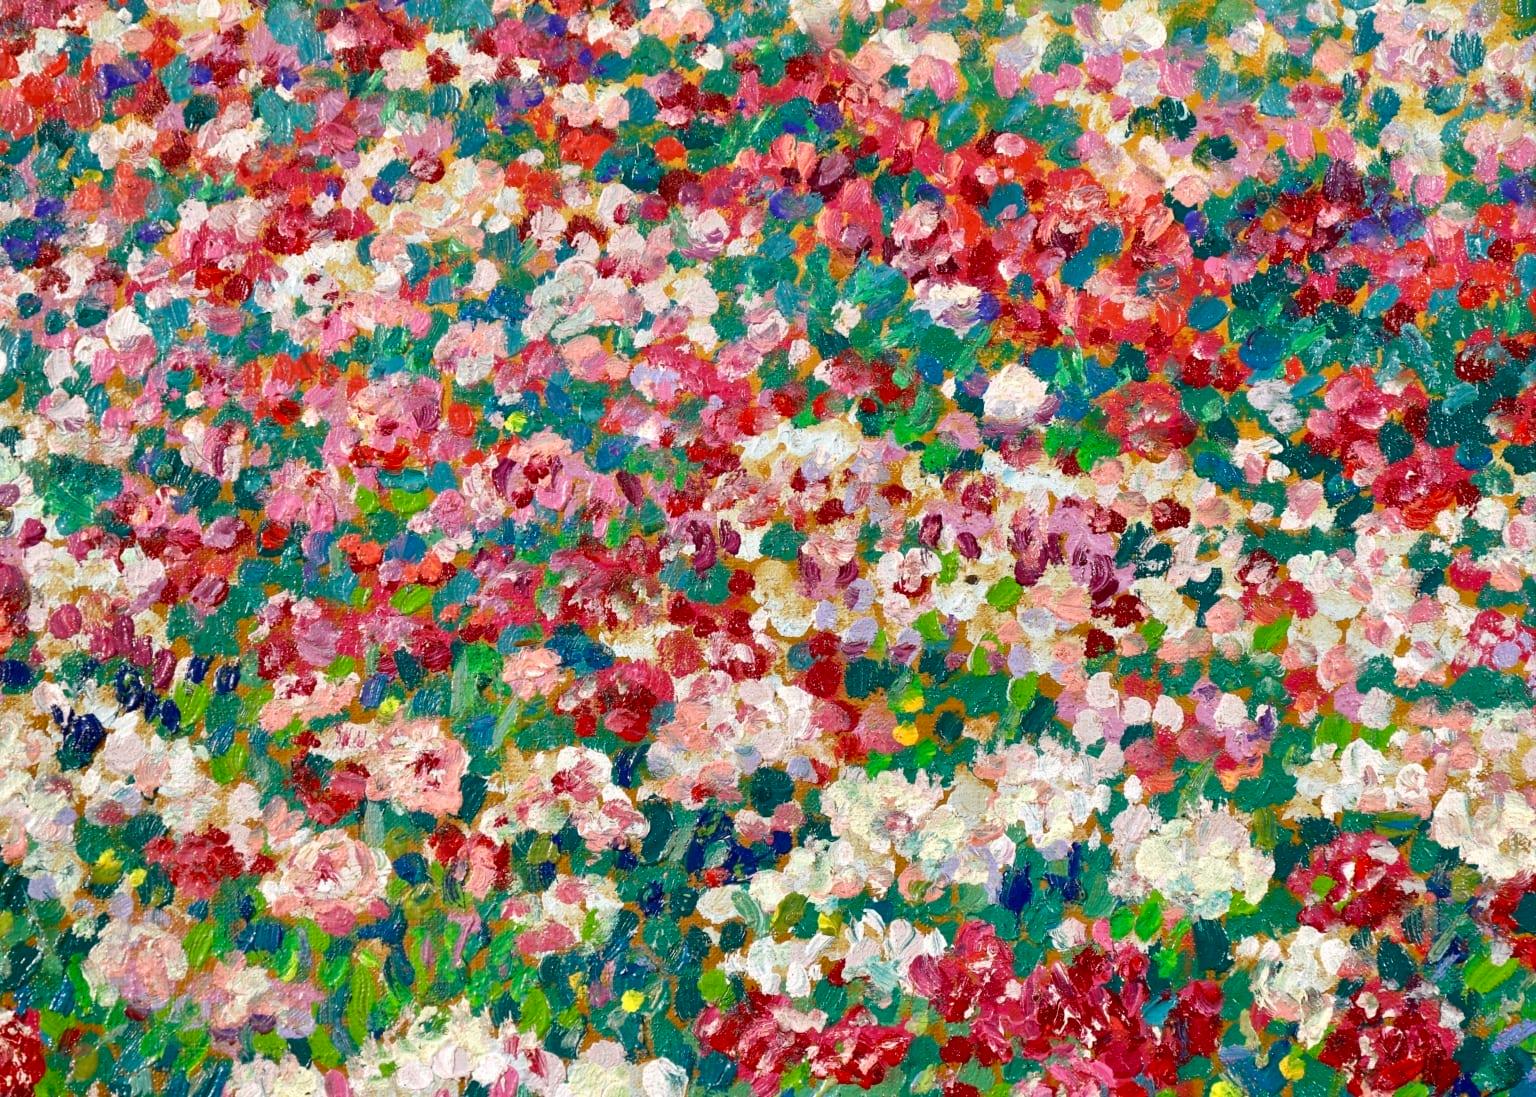 Field of Flowers - Post Impressionist Oil, Landscape Oil by J Martin-Ferrieres 6